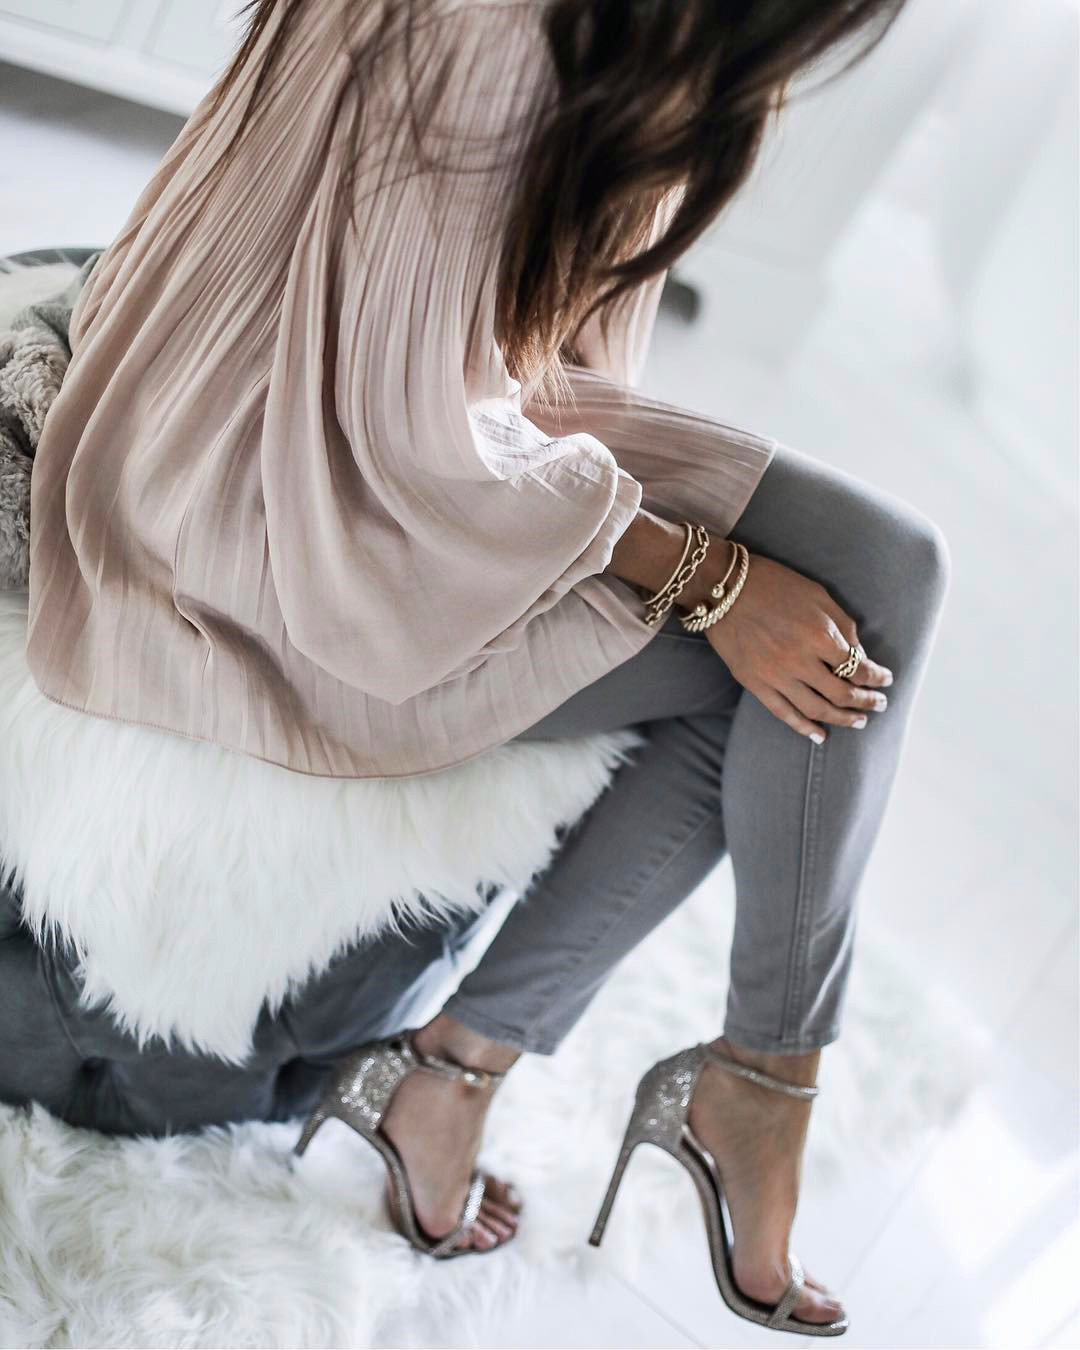 50+ Glamorous Fall Outfits To Inspire Yourself